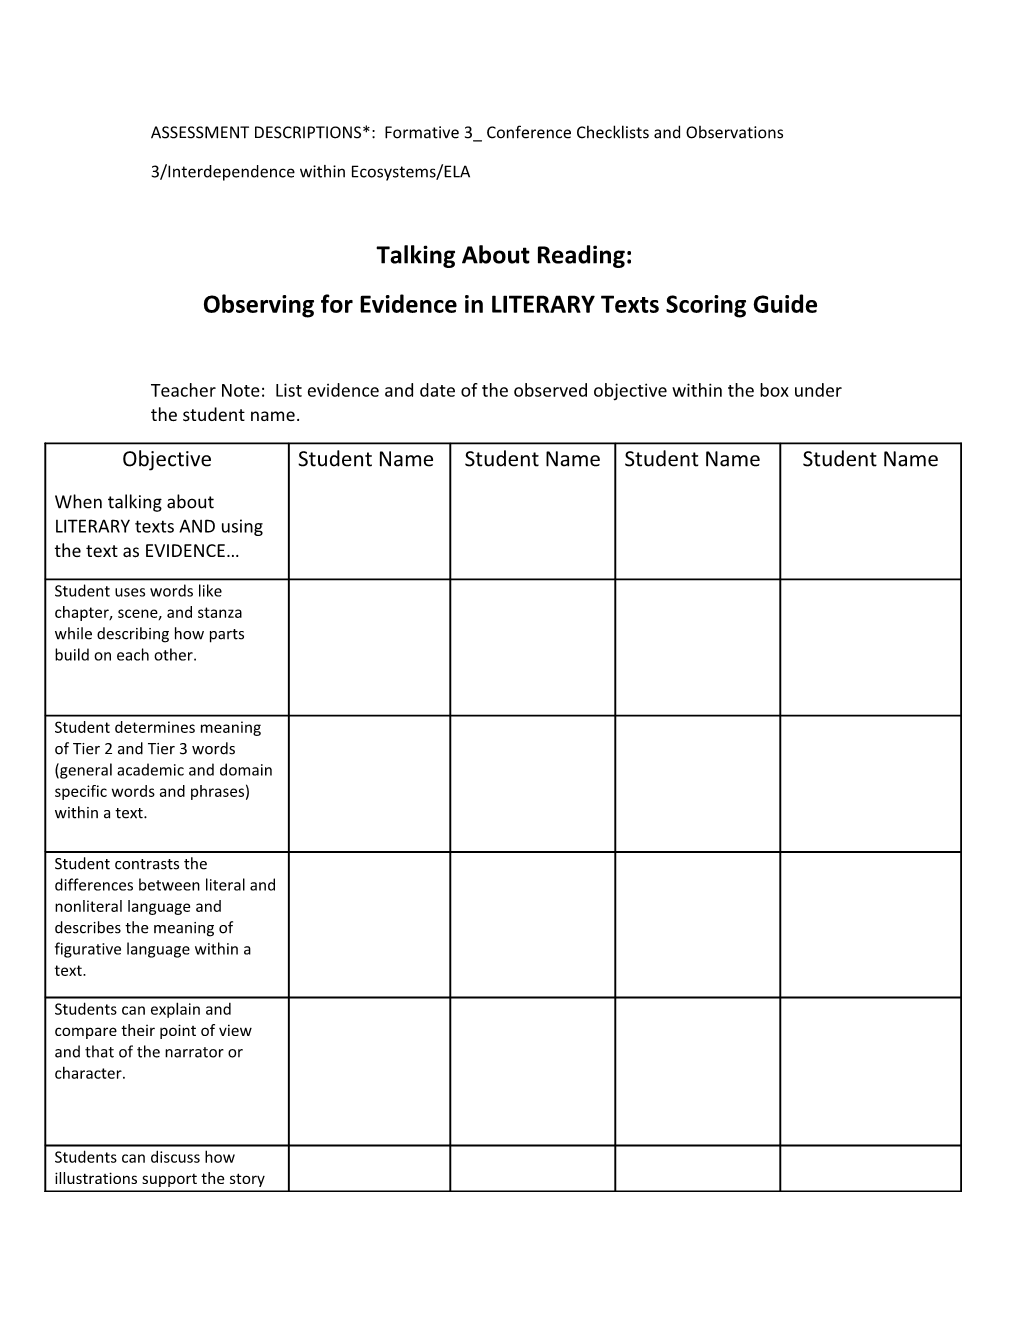 ASSESSMENT DESCRIPTIONS*: Formative 3 Conference Checklists and Observations